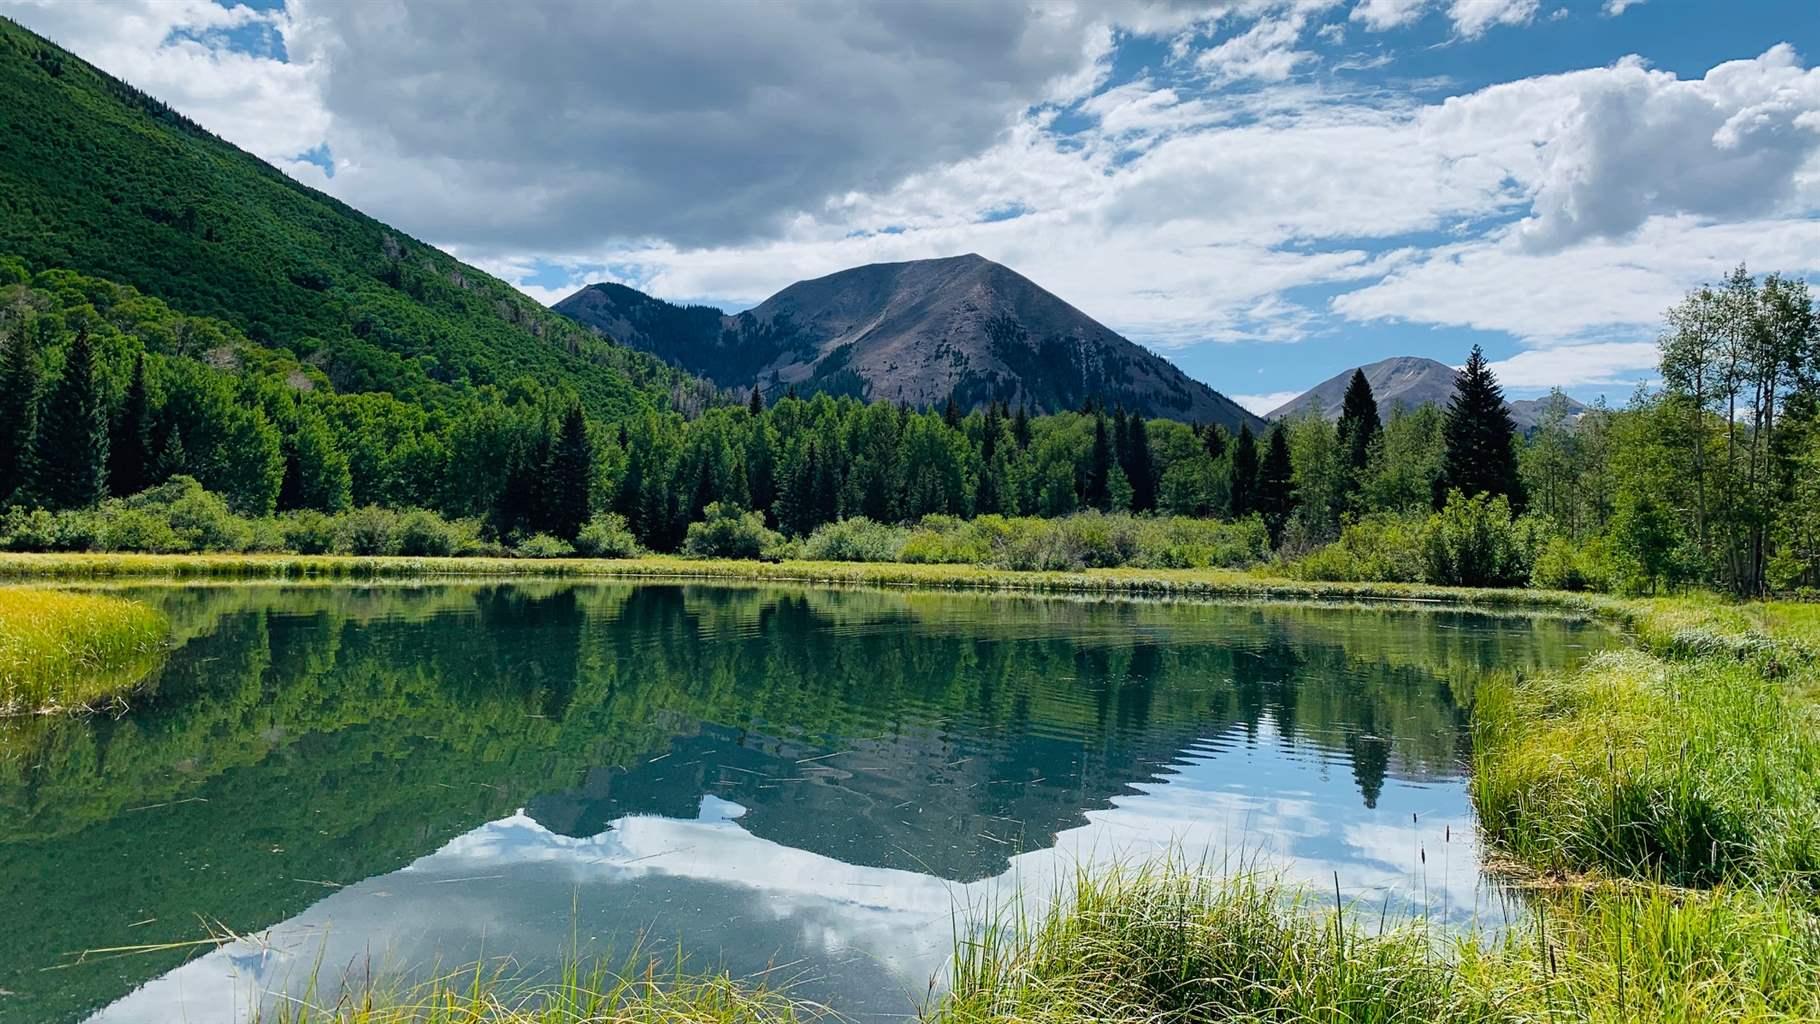 The peaks of the La Sal Mountains rise above Warner Lake in the Manti-La Sal National Forest east of Moab, Utah.